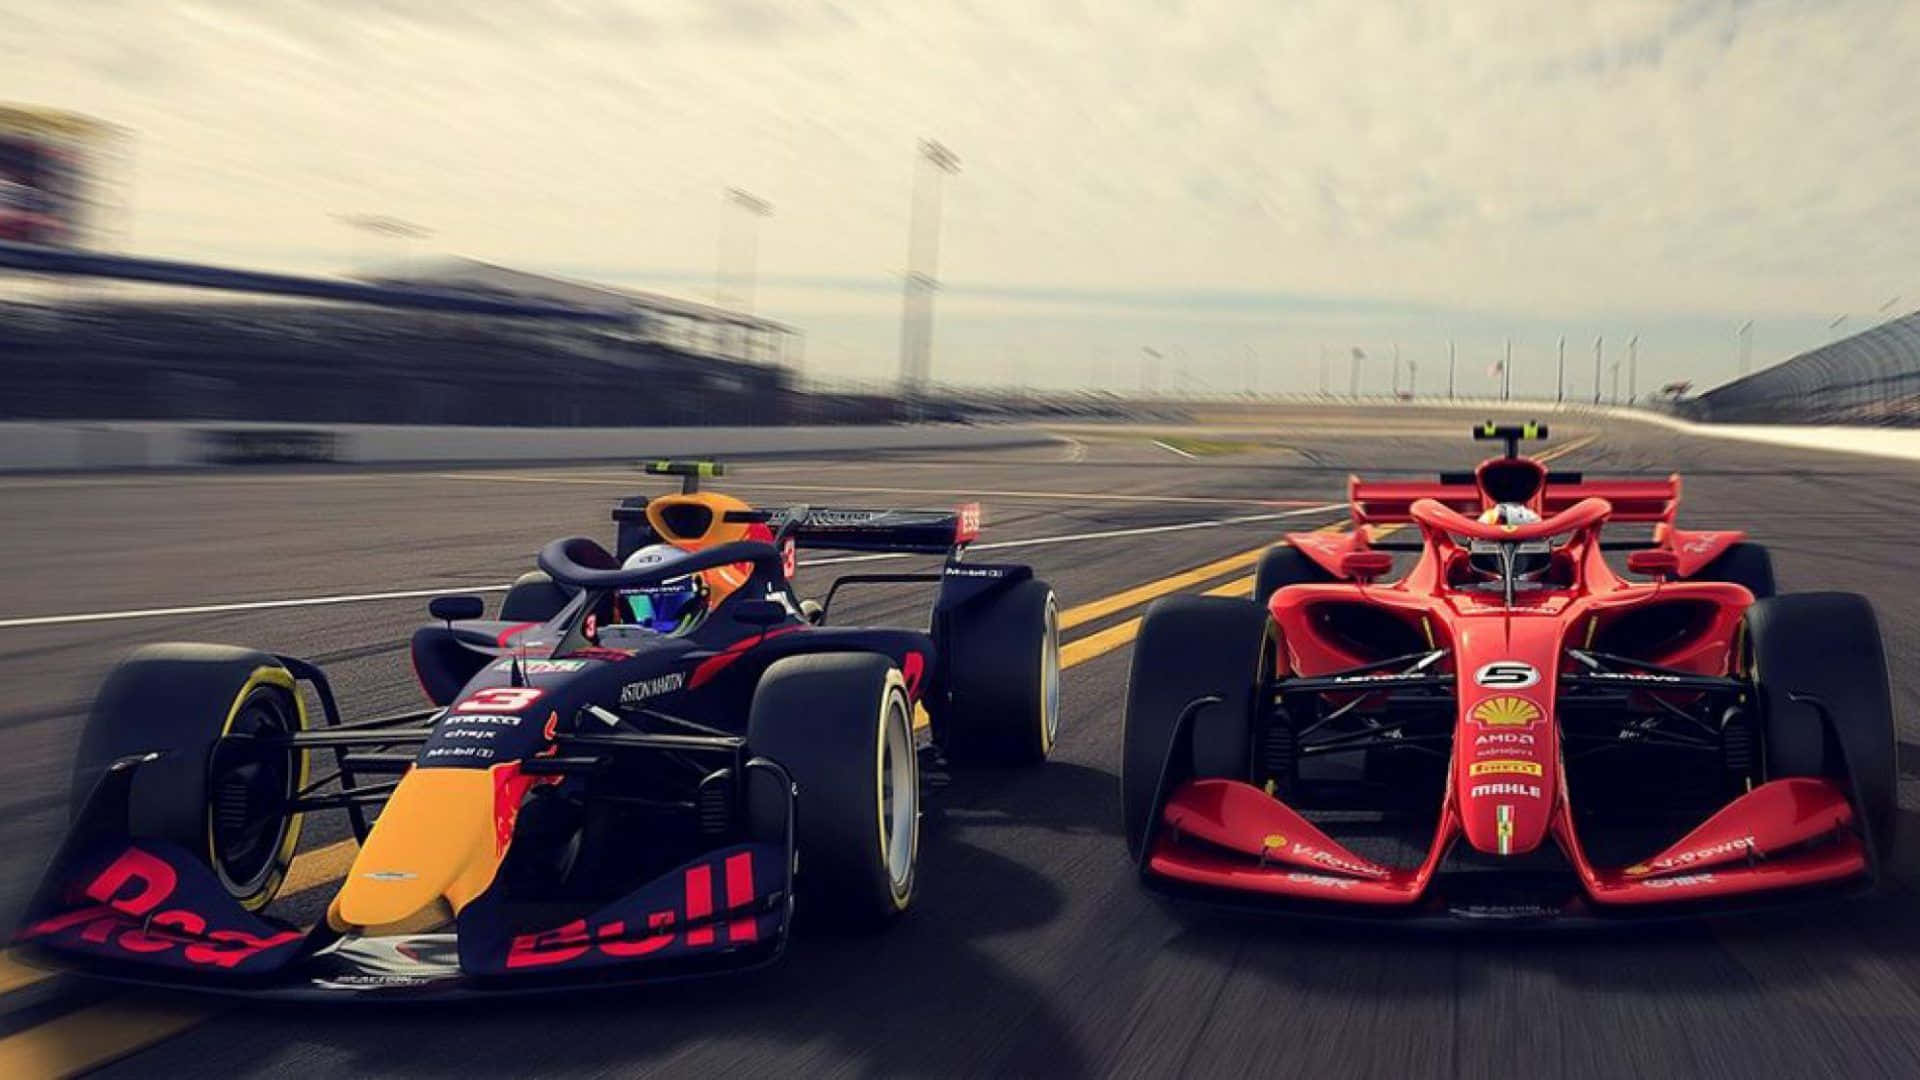 Two Red Bull Racing Cars On A Race Track Wallpaper